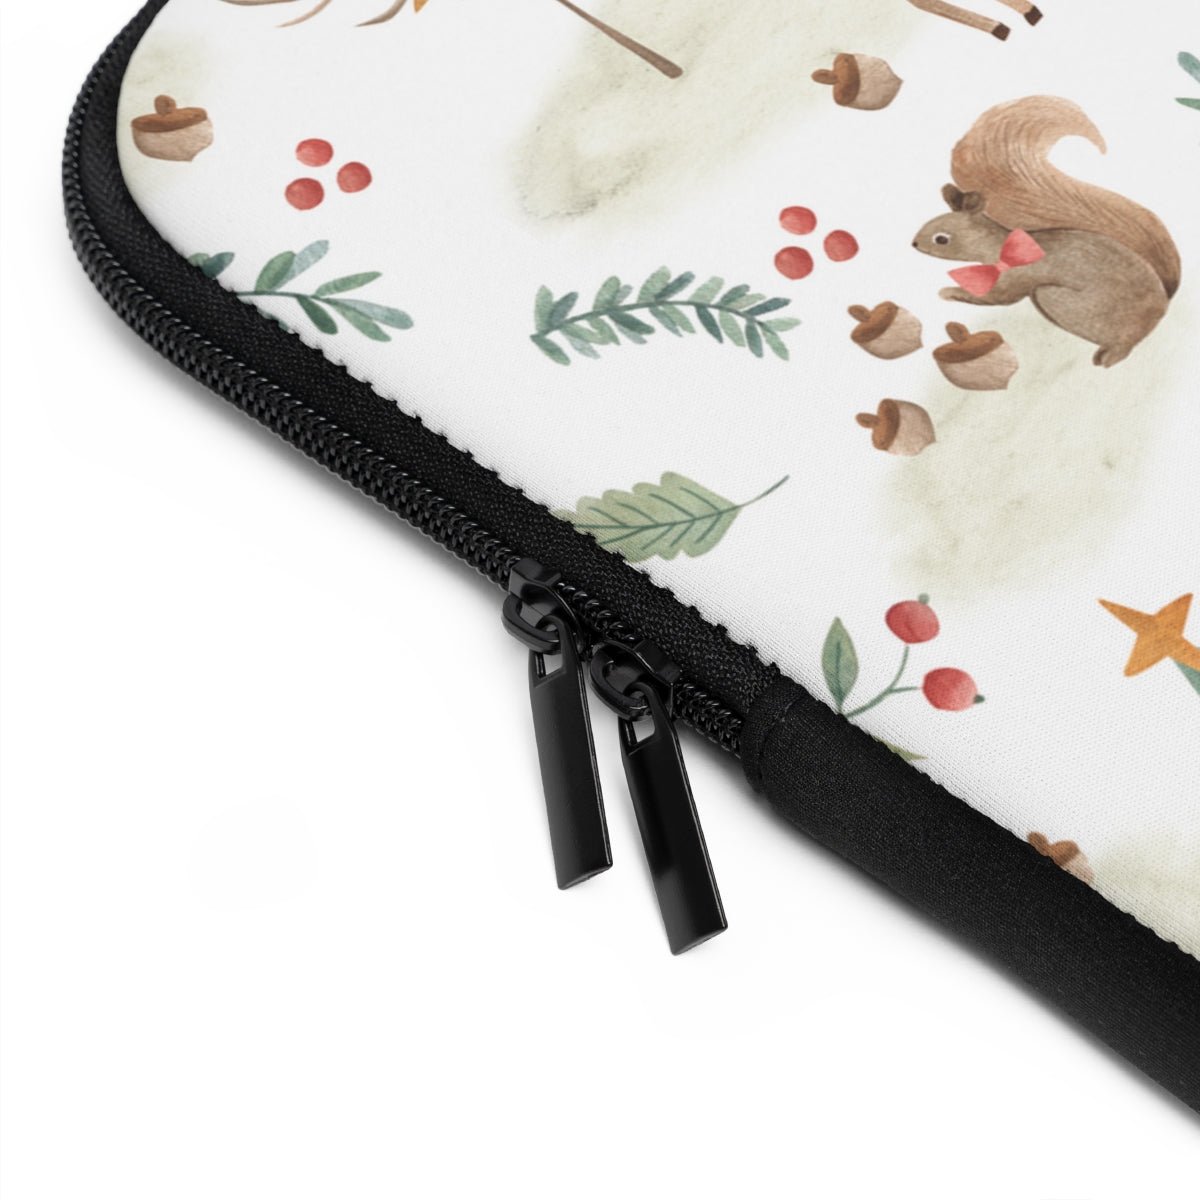 Christmas Woodland Animals Laptop Sleeve - Puffin Lime